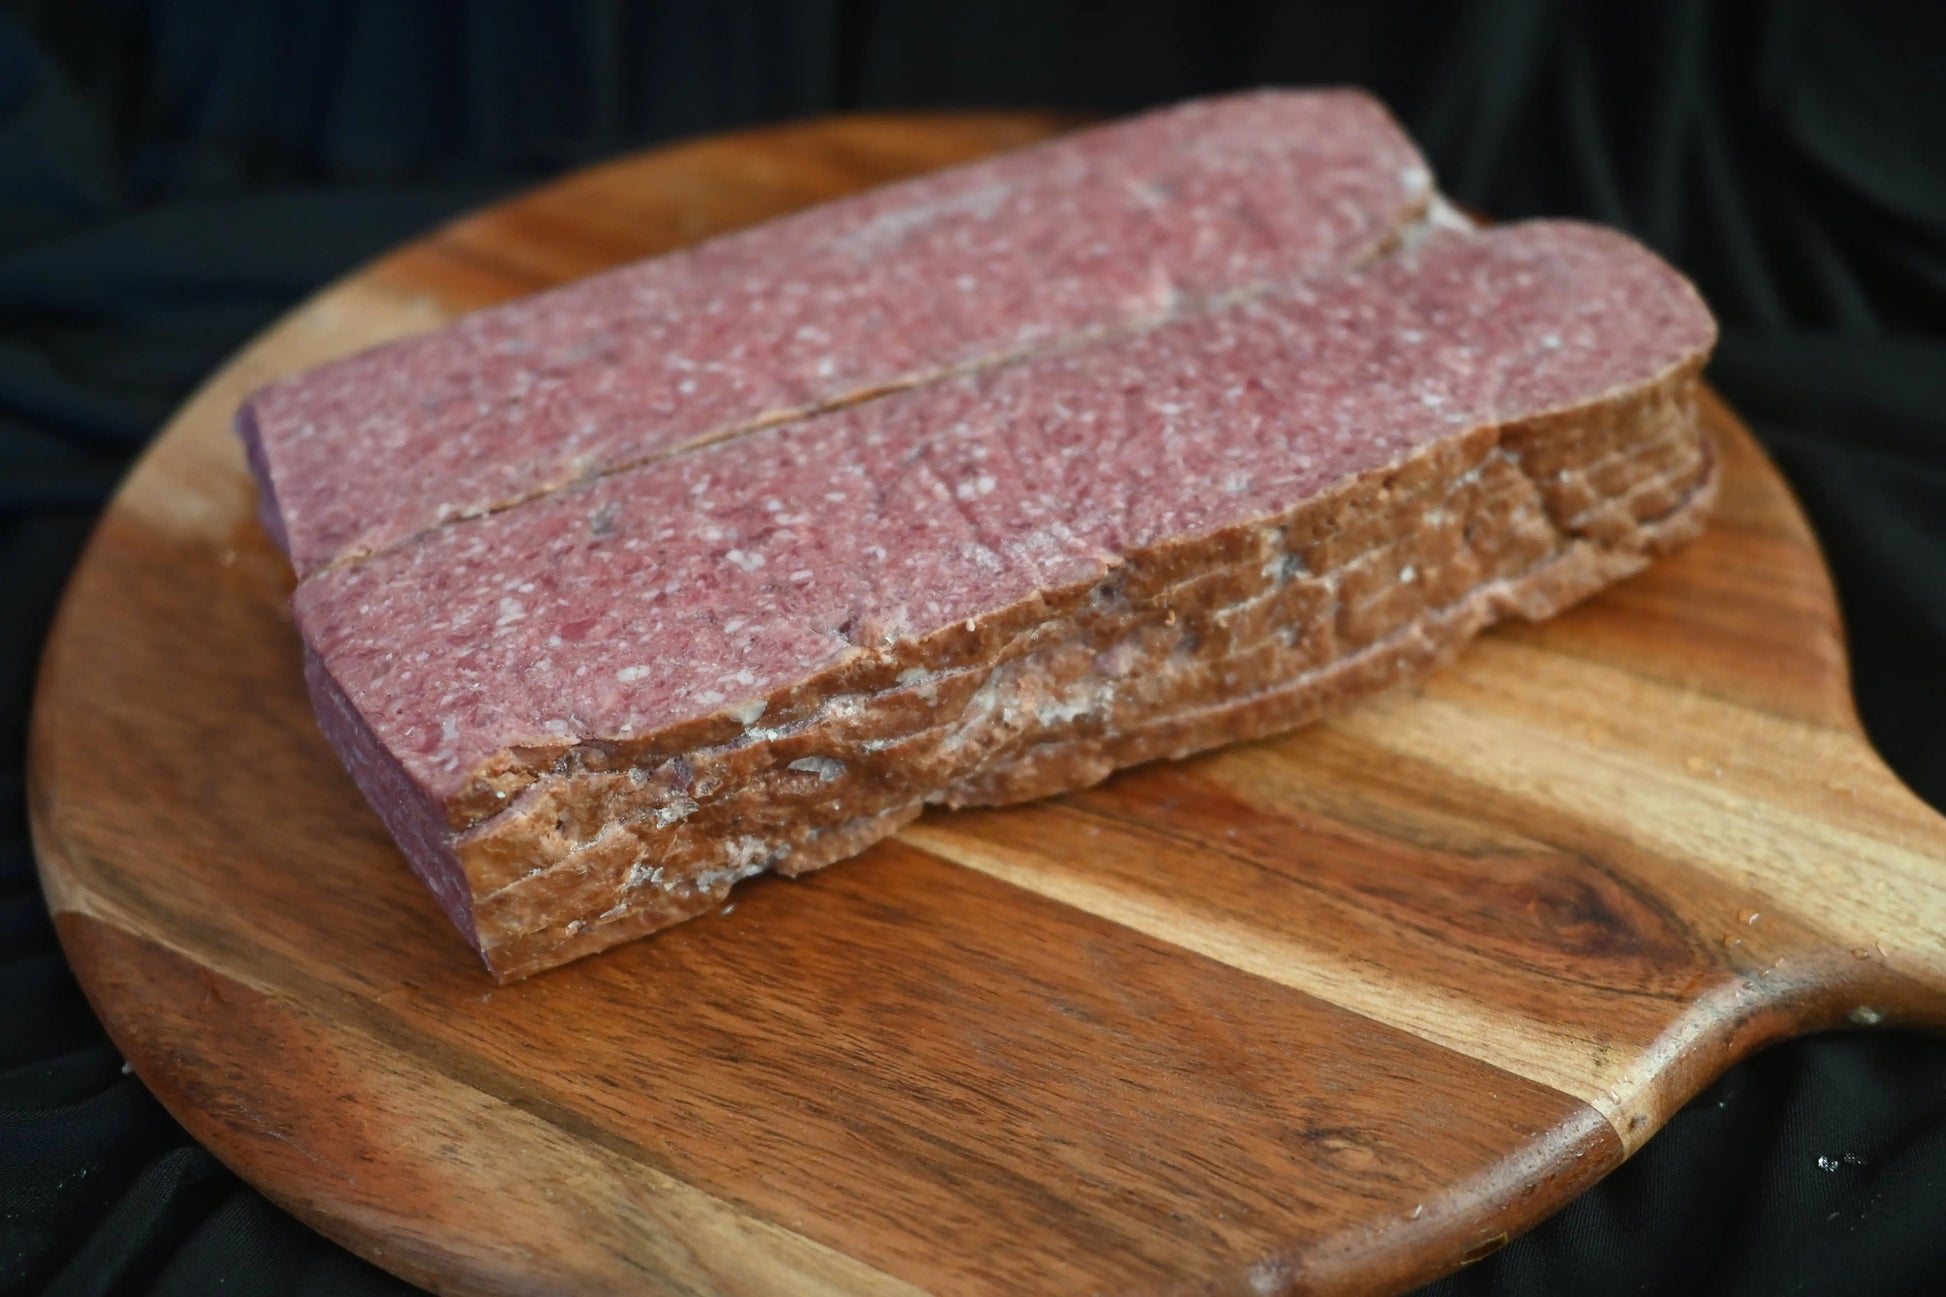 Pre-Smoked Wagyu Maple Breakfast StripsSavor the rich, smoky aroma and irresistible flavor of our Pre-Smoked Wagyu Maple Breakfast Strips, expertly crafted by Koehler Meat and Sausage Co. These mouthwaterPre-Smoked Wagyu Maple Breakfast StripsThe Hufeisen-Ranch (WYO Wagyu)